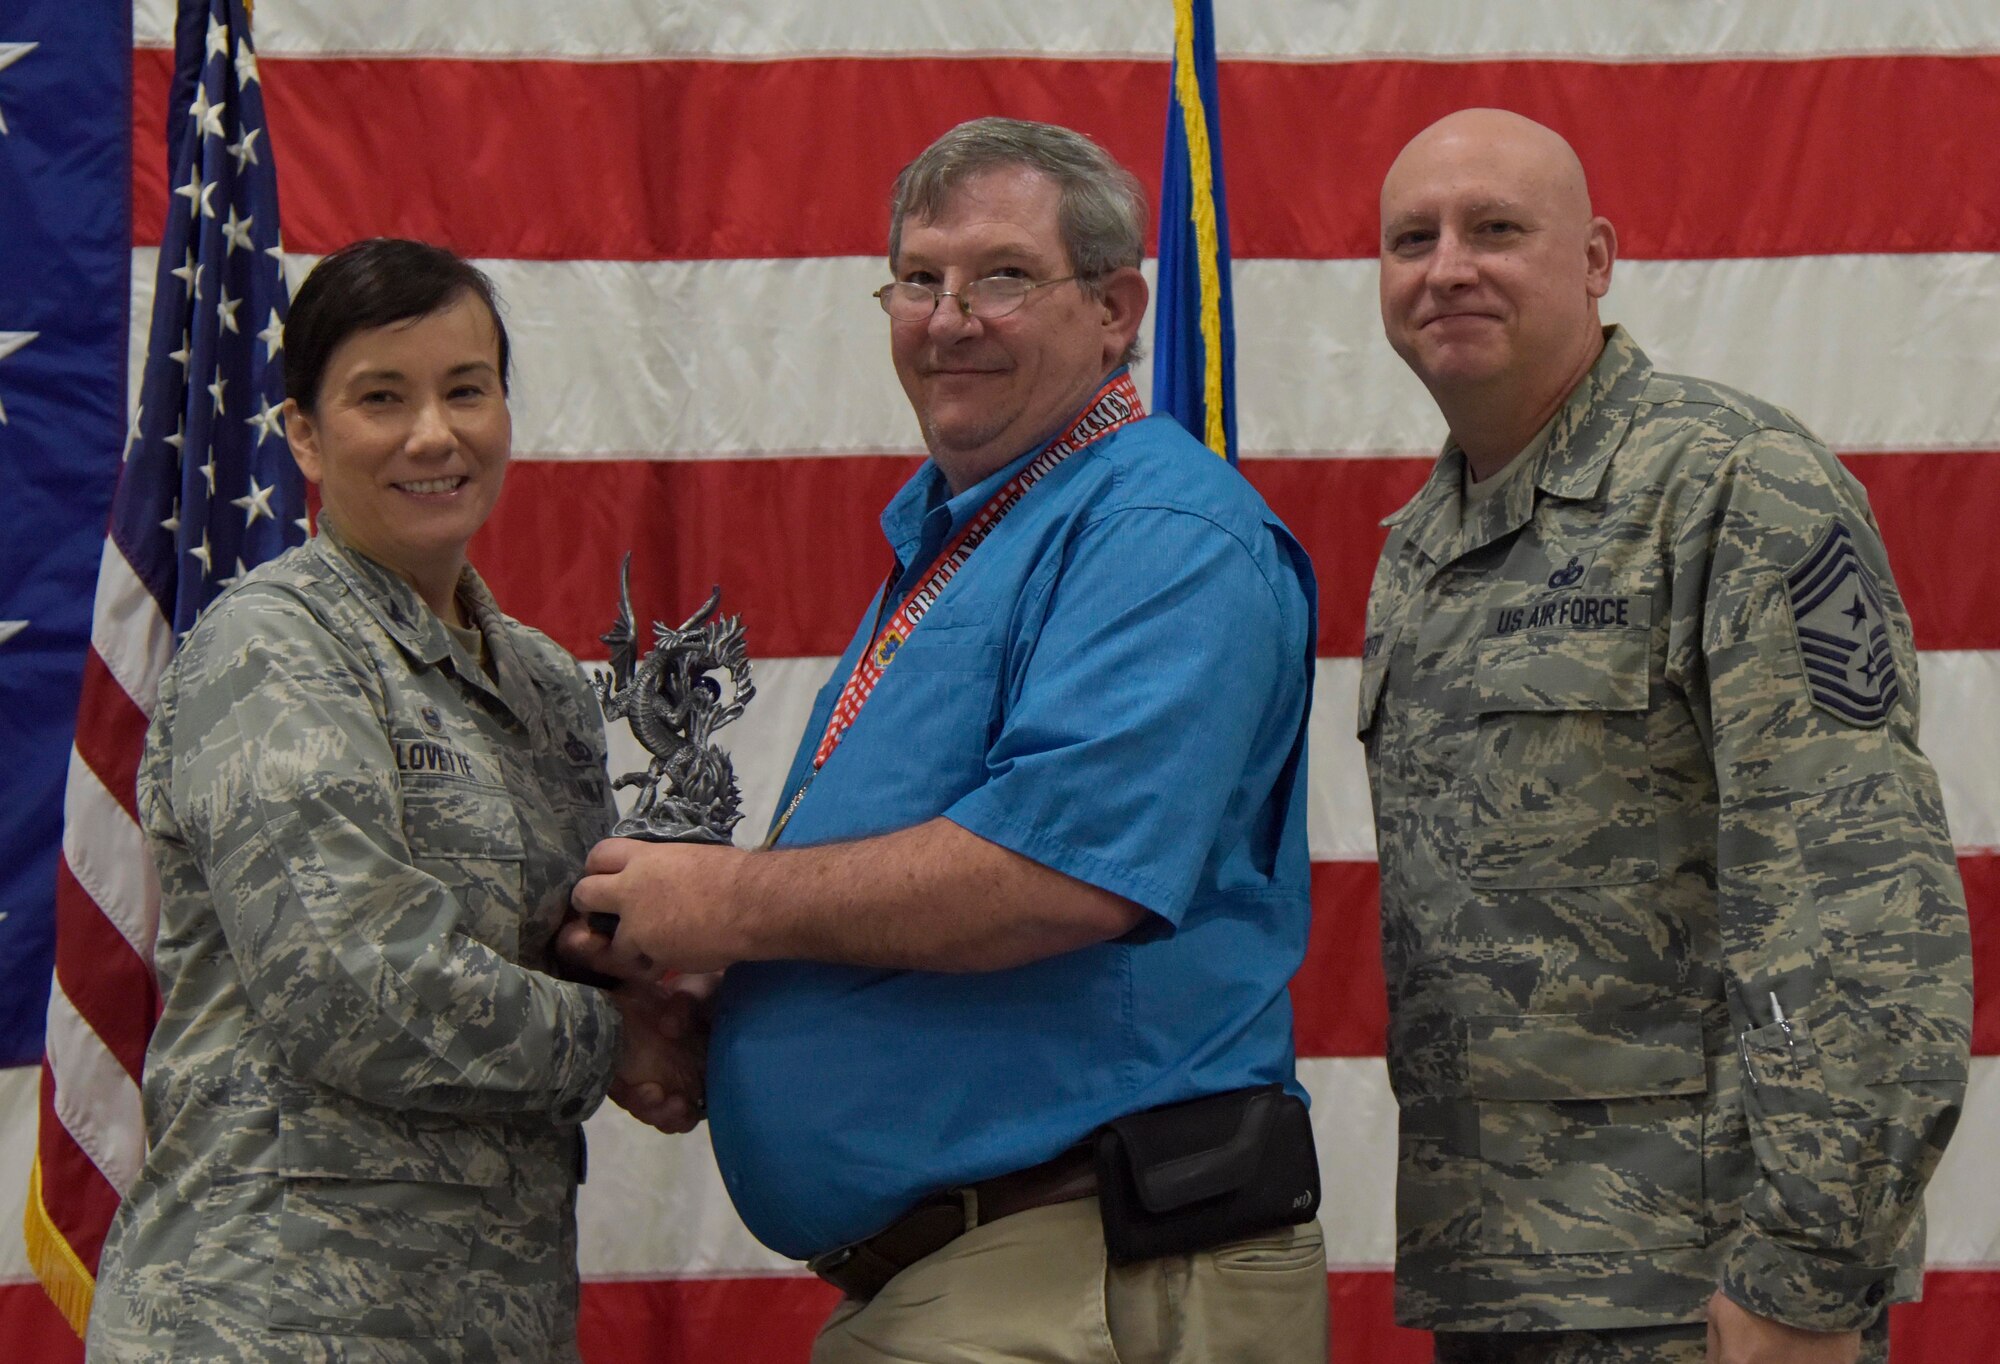 U.S. Air Force Col. Debra Lovette, 81st Training Wing commander, and Chief Master Sgt. David Pizzuto, 81st TRW command chief, present Len Van Sittert, 81st Medical Support Squadron medical contract manager, with the Civilian of the Year award, Supervisory Category II, during the 81st Training Wing's 2018 Annual Awards Ceremony inside a hangar at Keesler Air Force Base, Mississippi, Feb. 1, 2019. During the ceremony, base leadership recognized outstanding Airmen and civilians from across the installation for their accomplishments throughout 2018. (U.S. Air Force photo by Kemberly Groue)